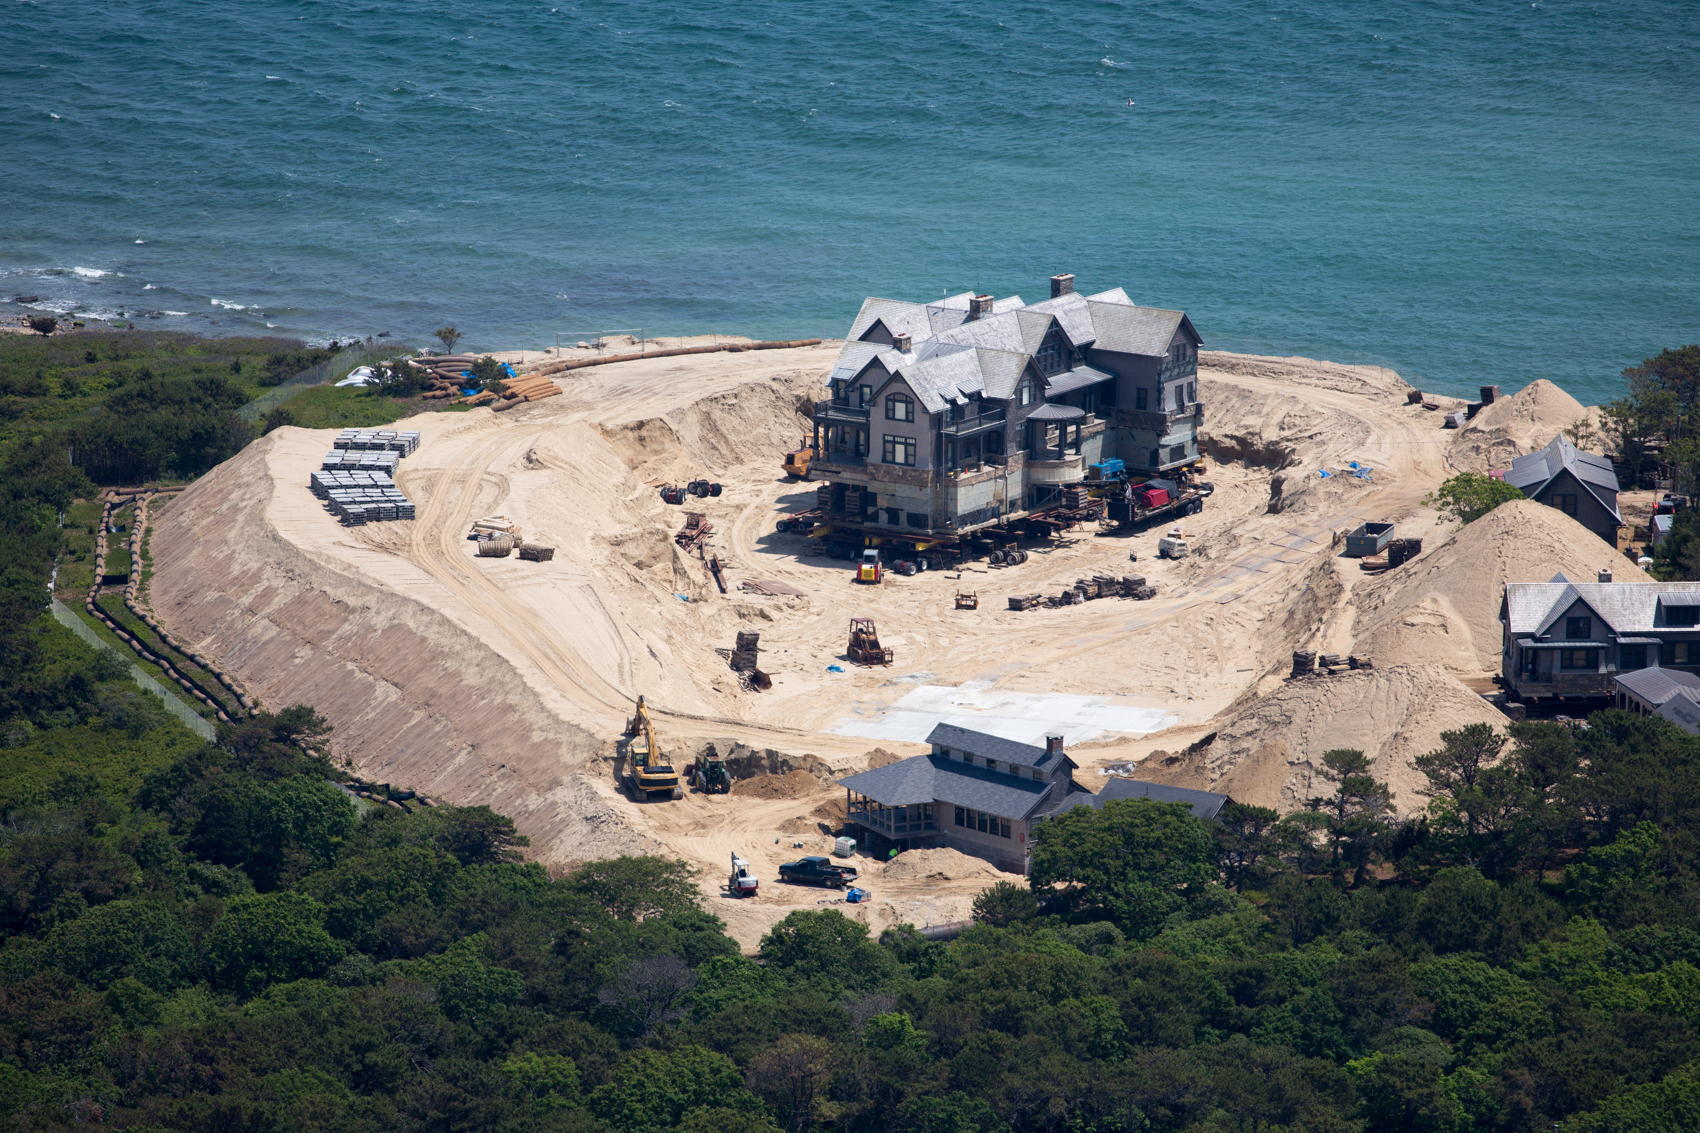 An 8,000 square foot house in Chappaquiddick, Massachusetts on Martha’s Vineyard is moved inland from a precarious perch on an eroding bluff.